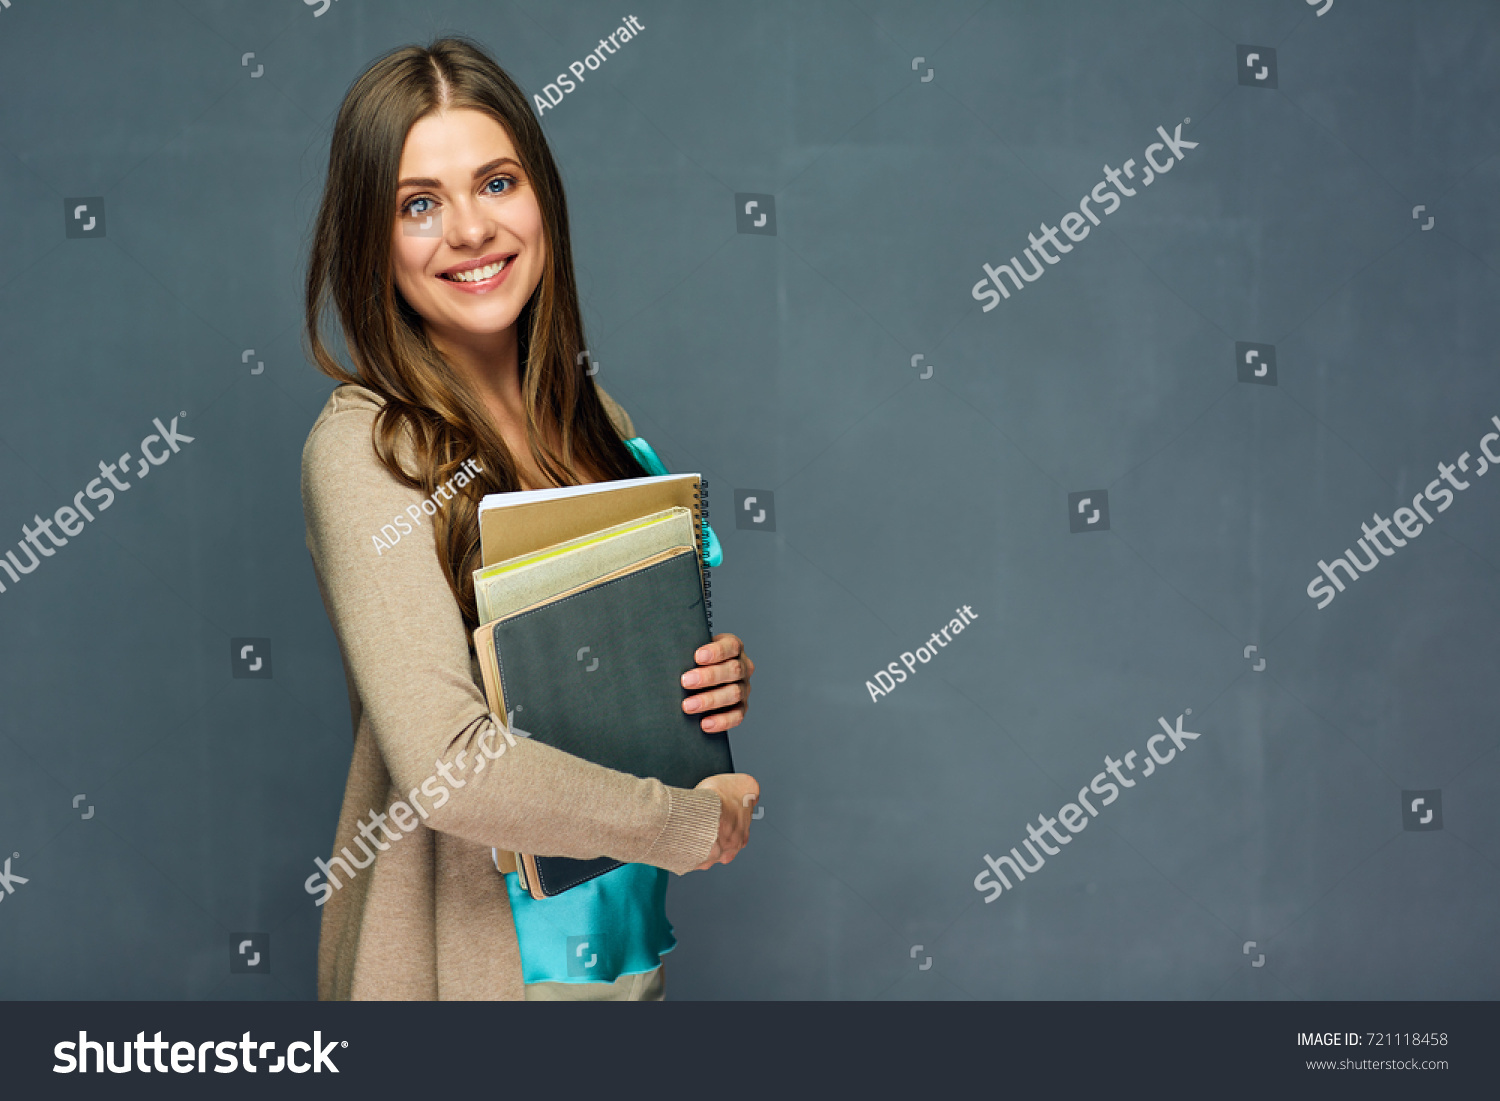 Smiling girl student or woman teacher portrait on gray wall. #721118458